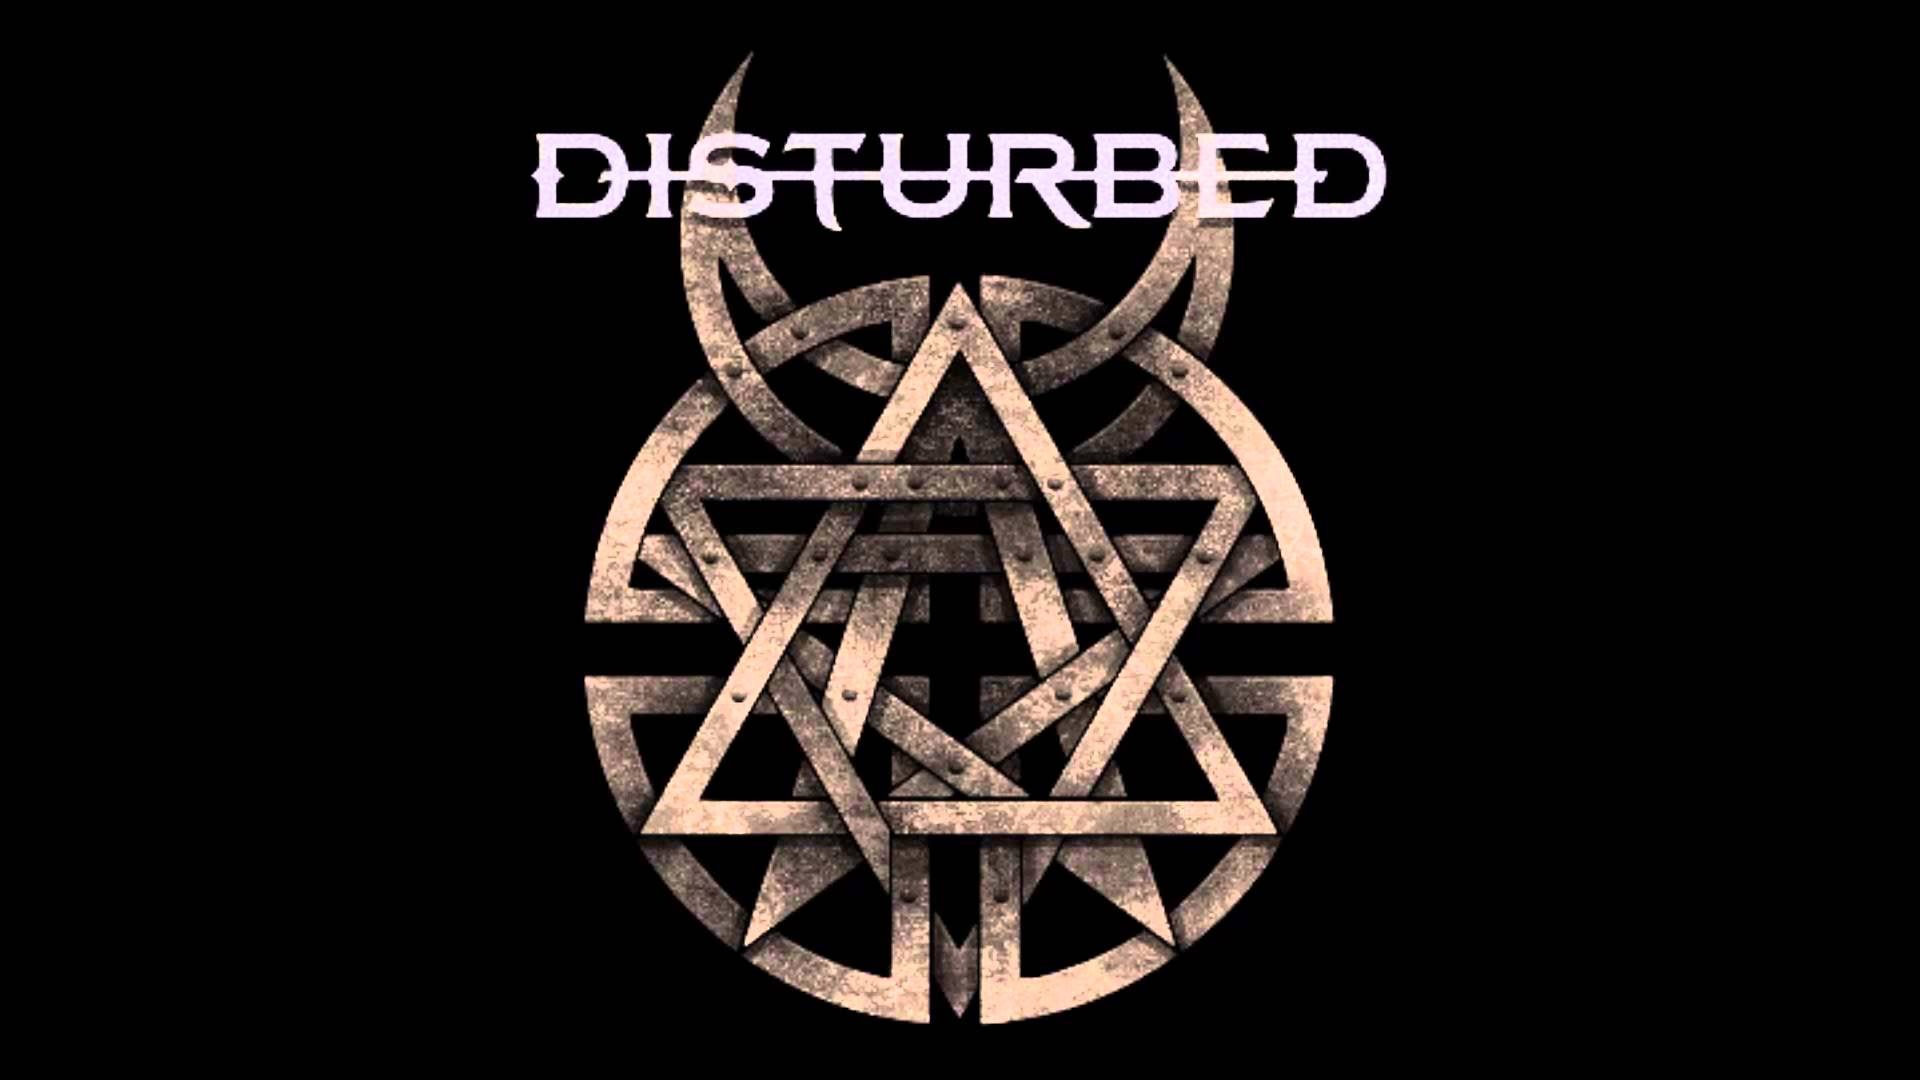 Disturbed Emblem posted by Christopher Mercado 1920x1080